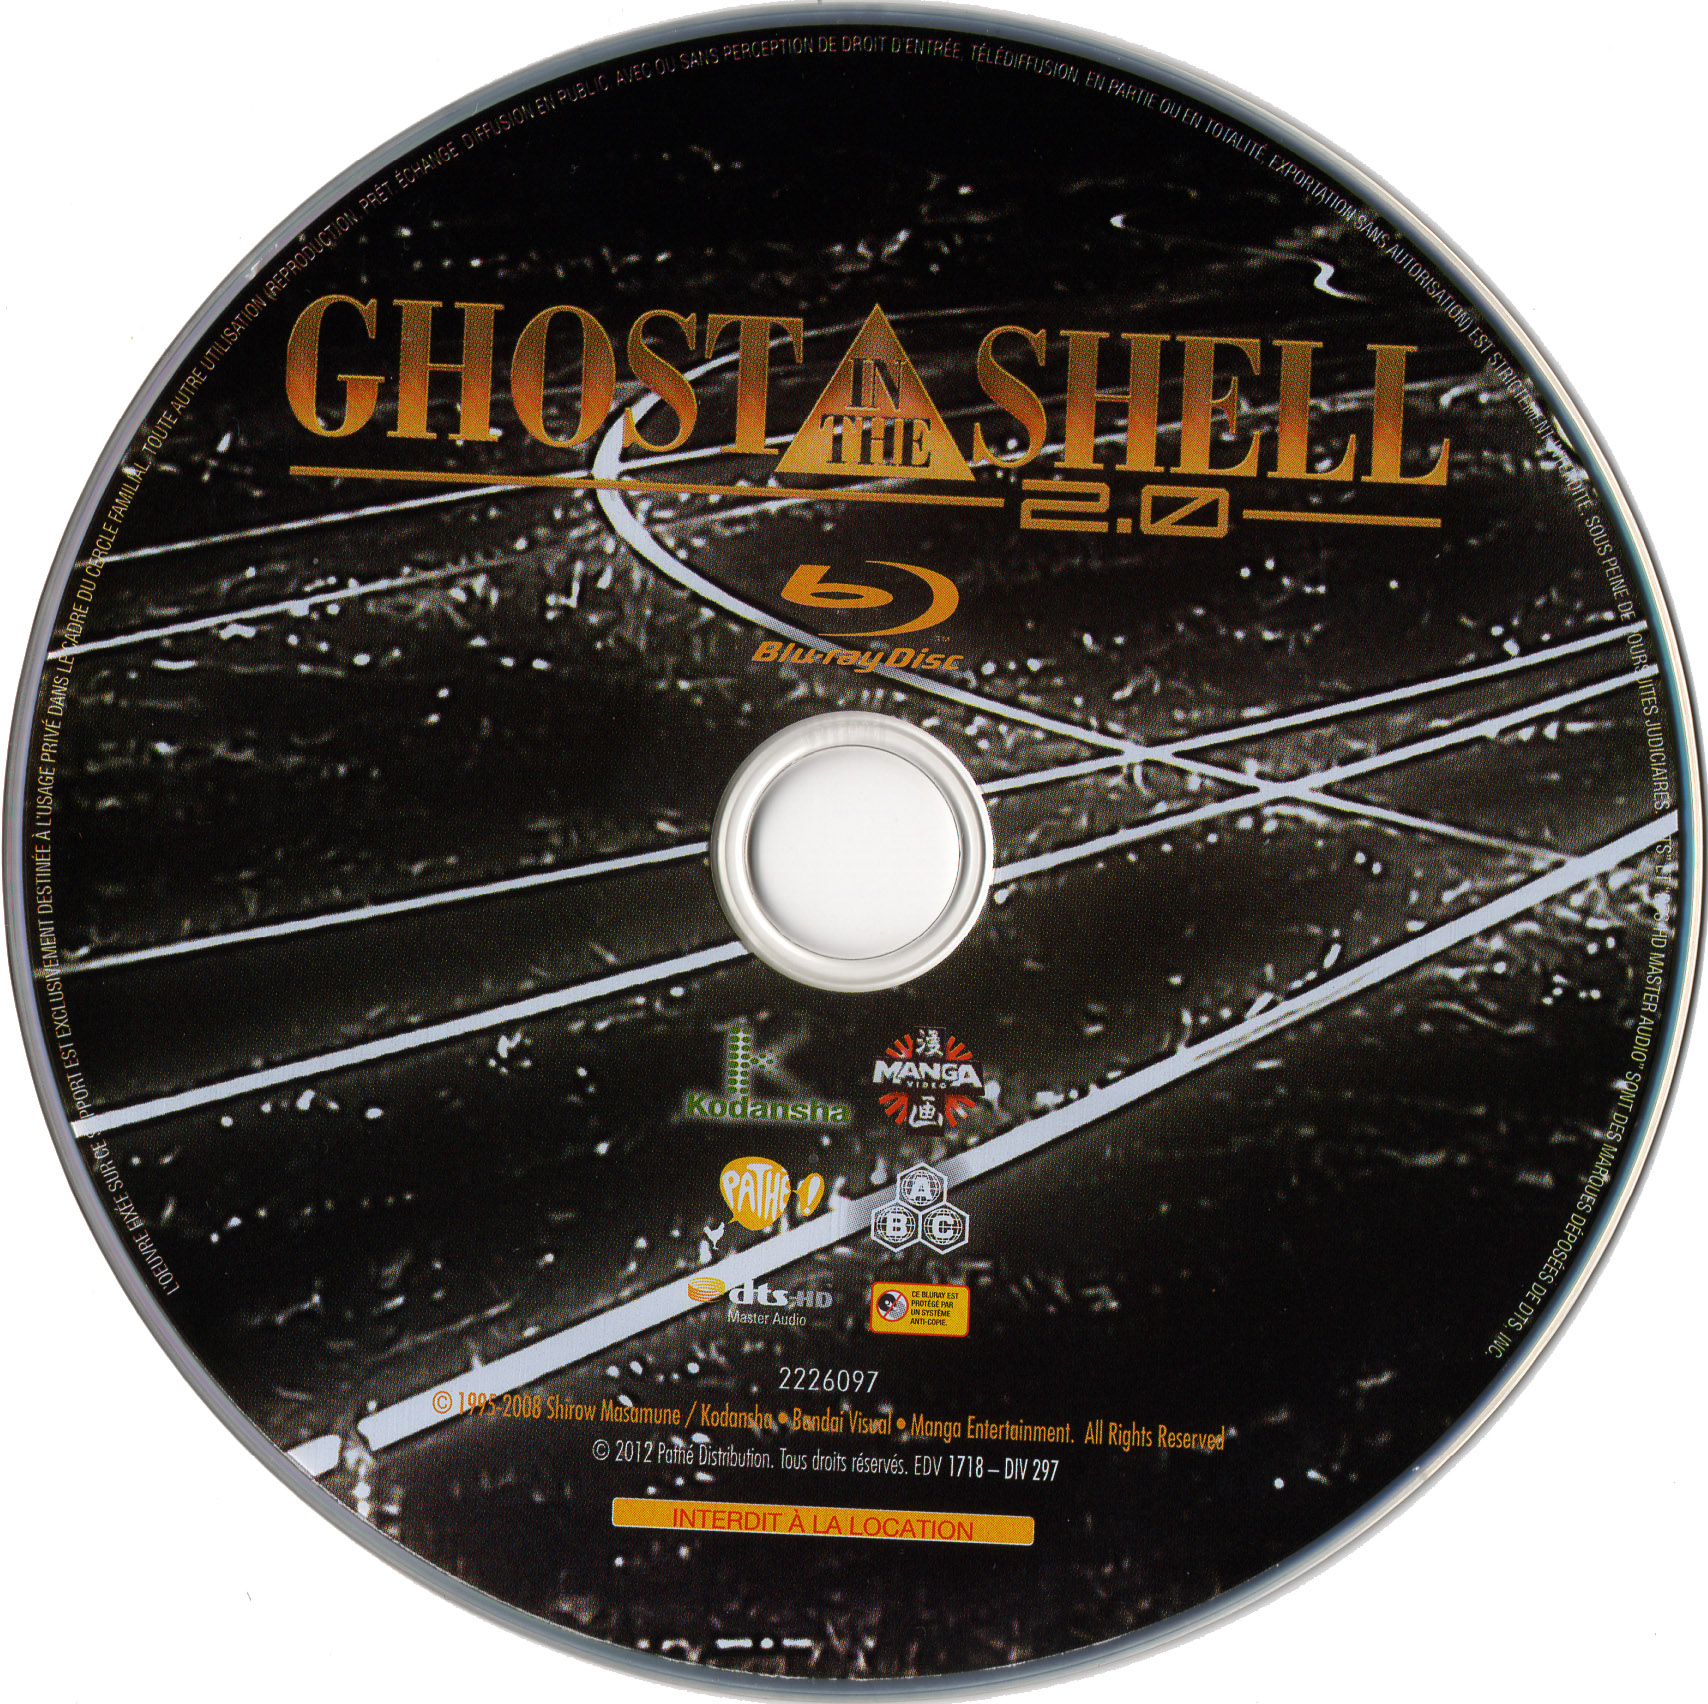 Ghost in the shell 2 0 (BLU-RAY)